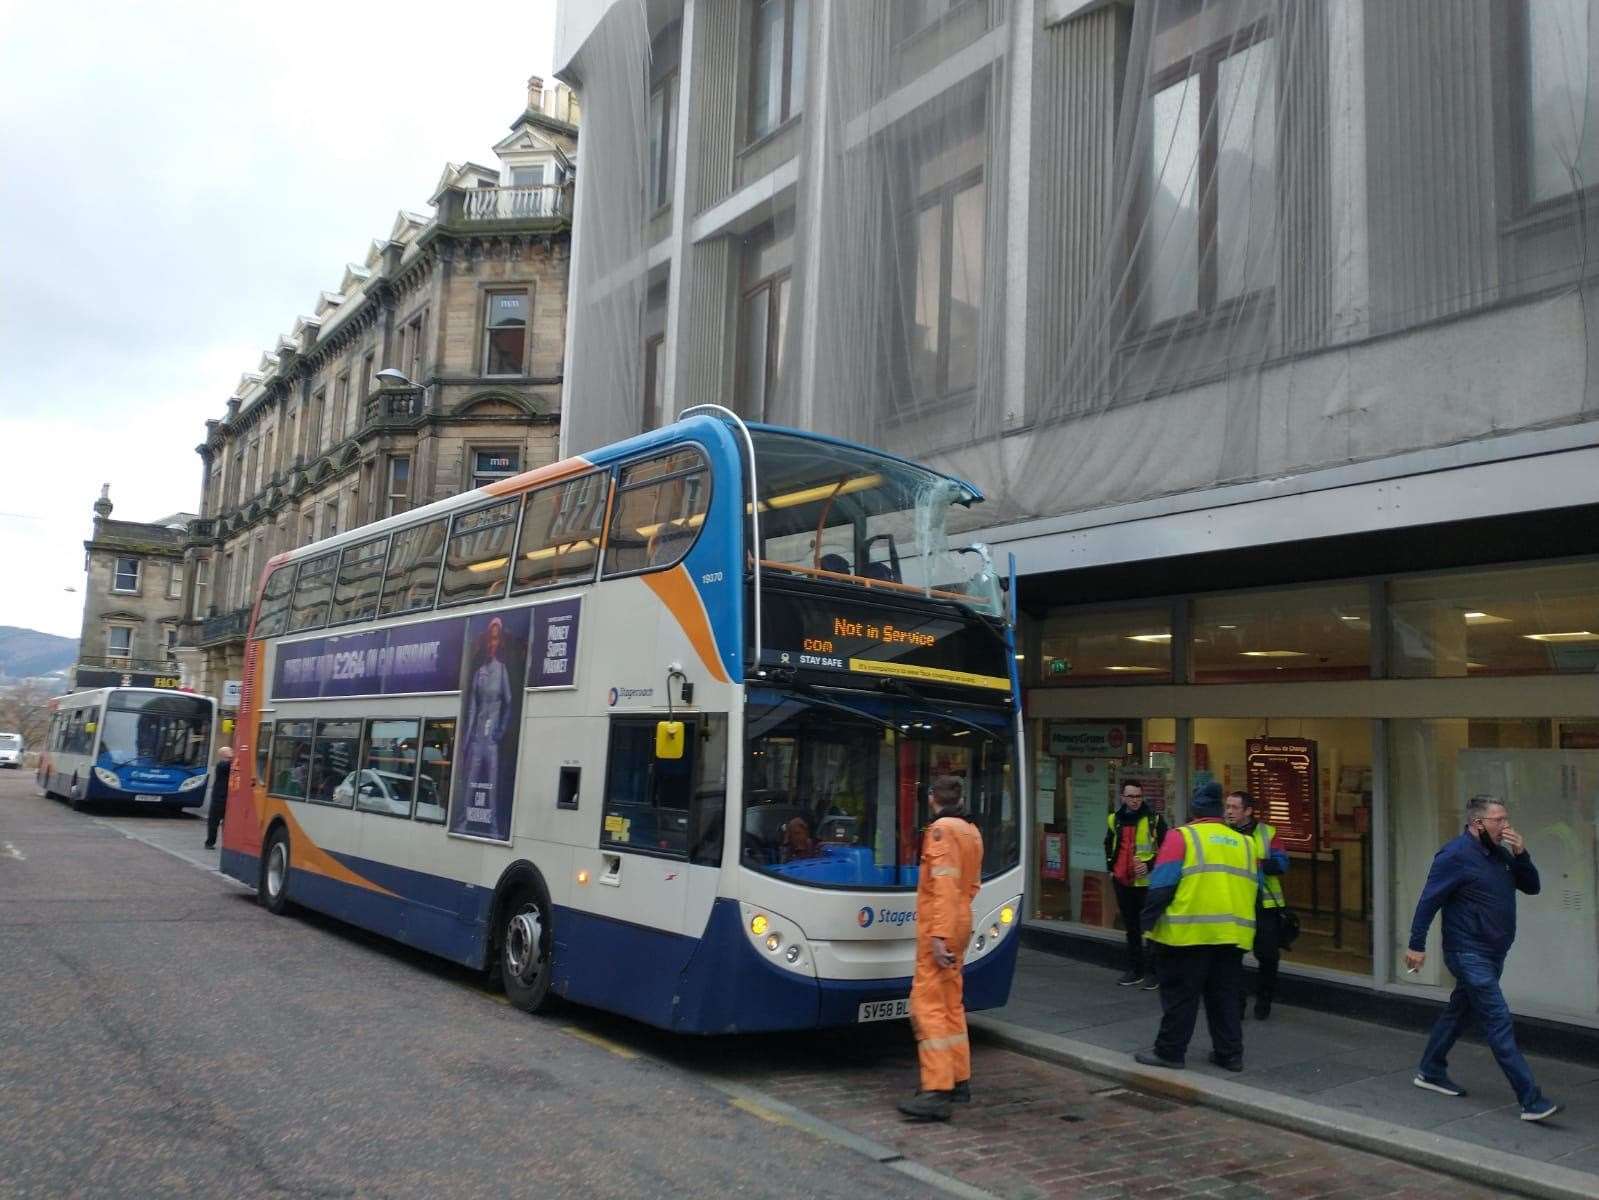 The bus in Queensgate this morning.